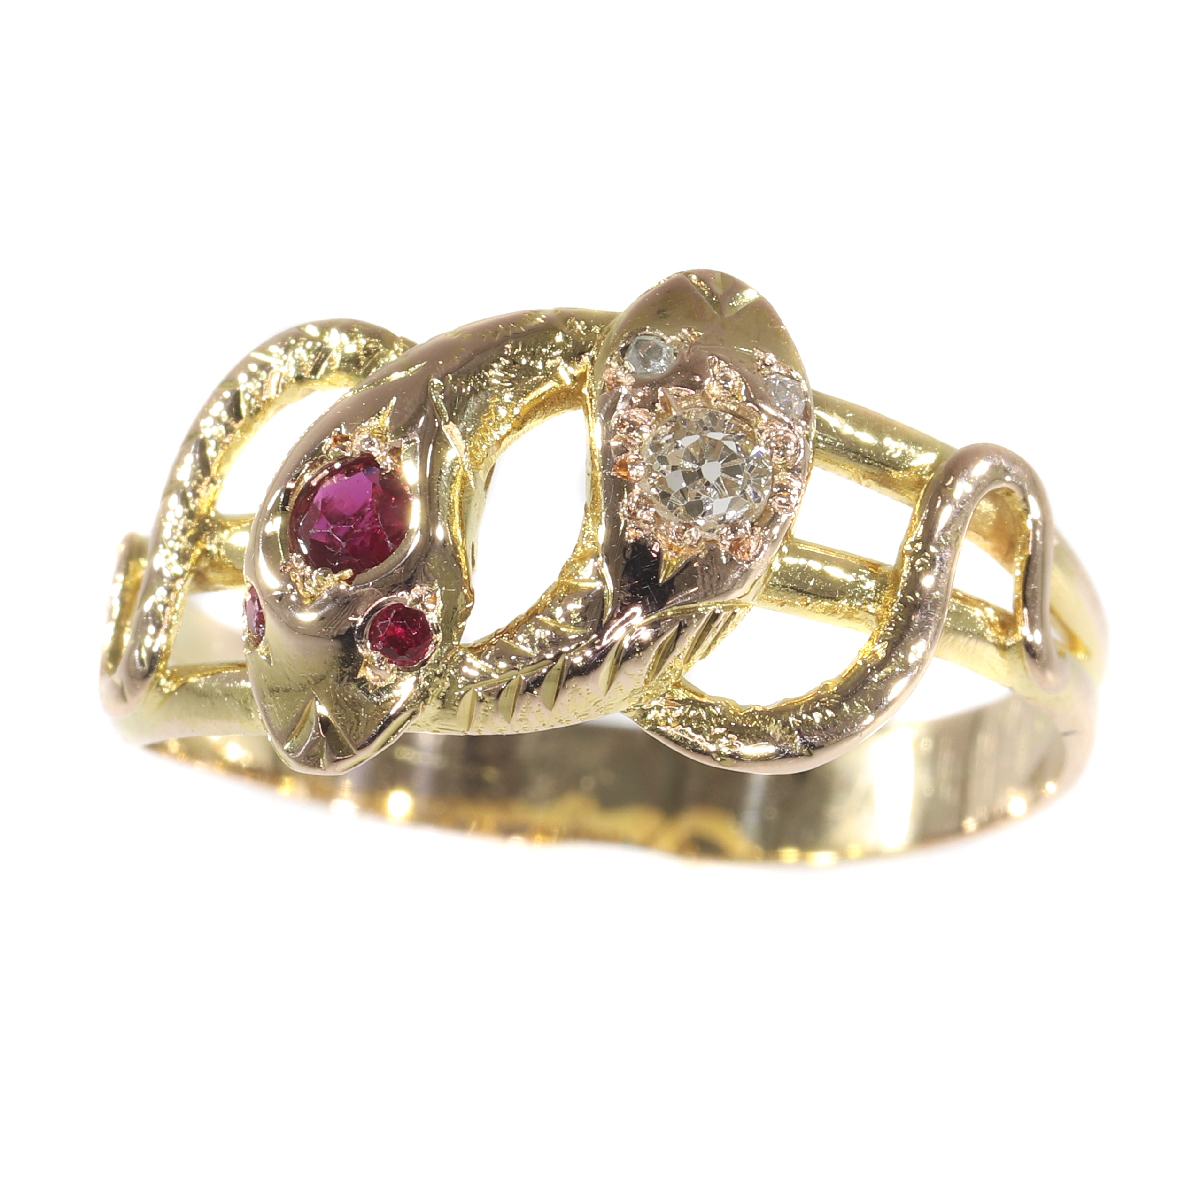 Late Victorian gold snake serpent ring set with diamonds and rubies